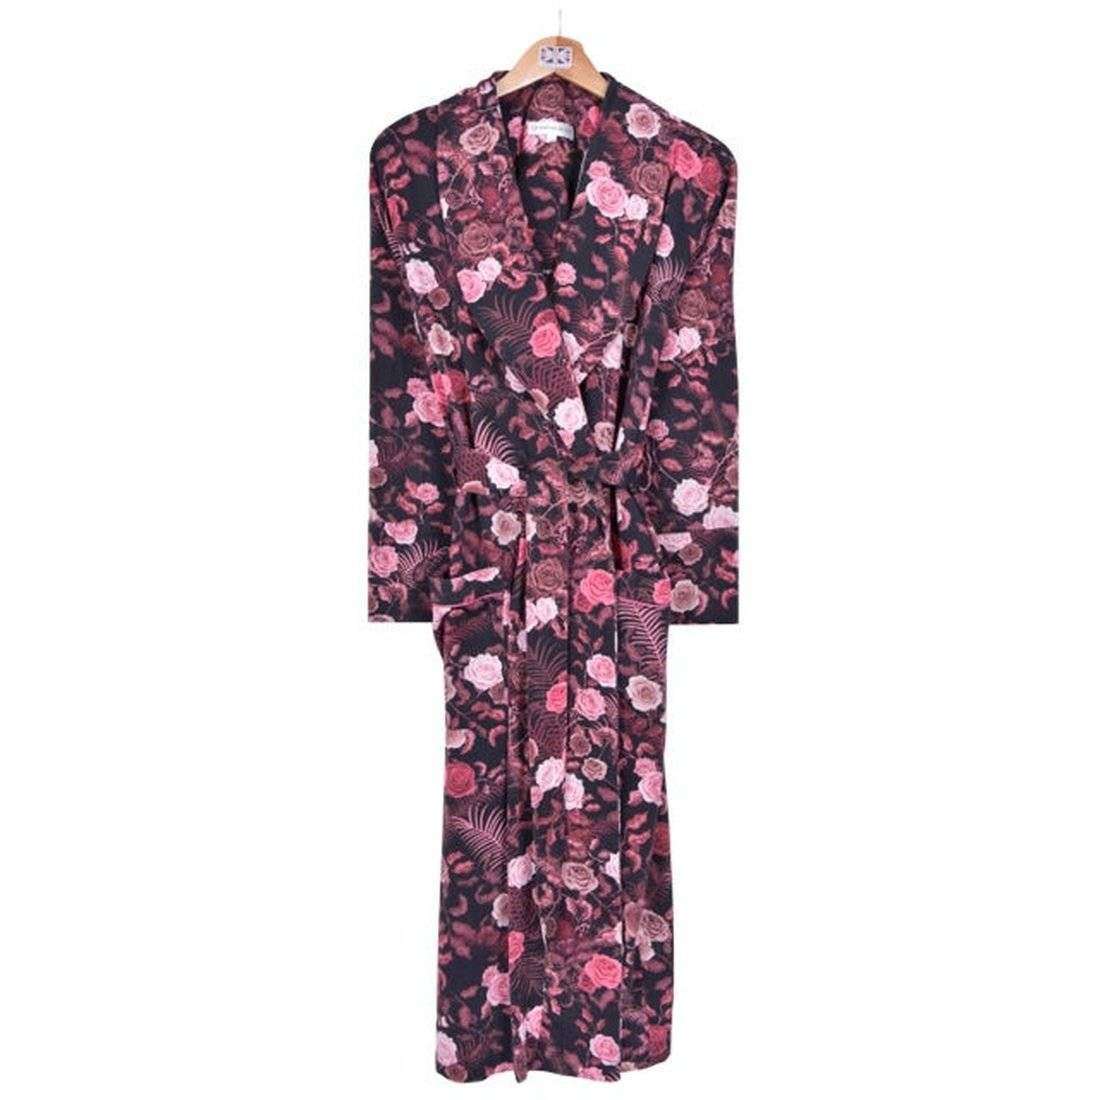 Bown of London Lightweight Dressing Gown - Bengal Rose Black - Small - 8-10 UK | 4-6 US | 90-97cm | 36"- 38"